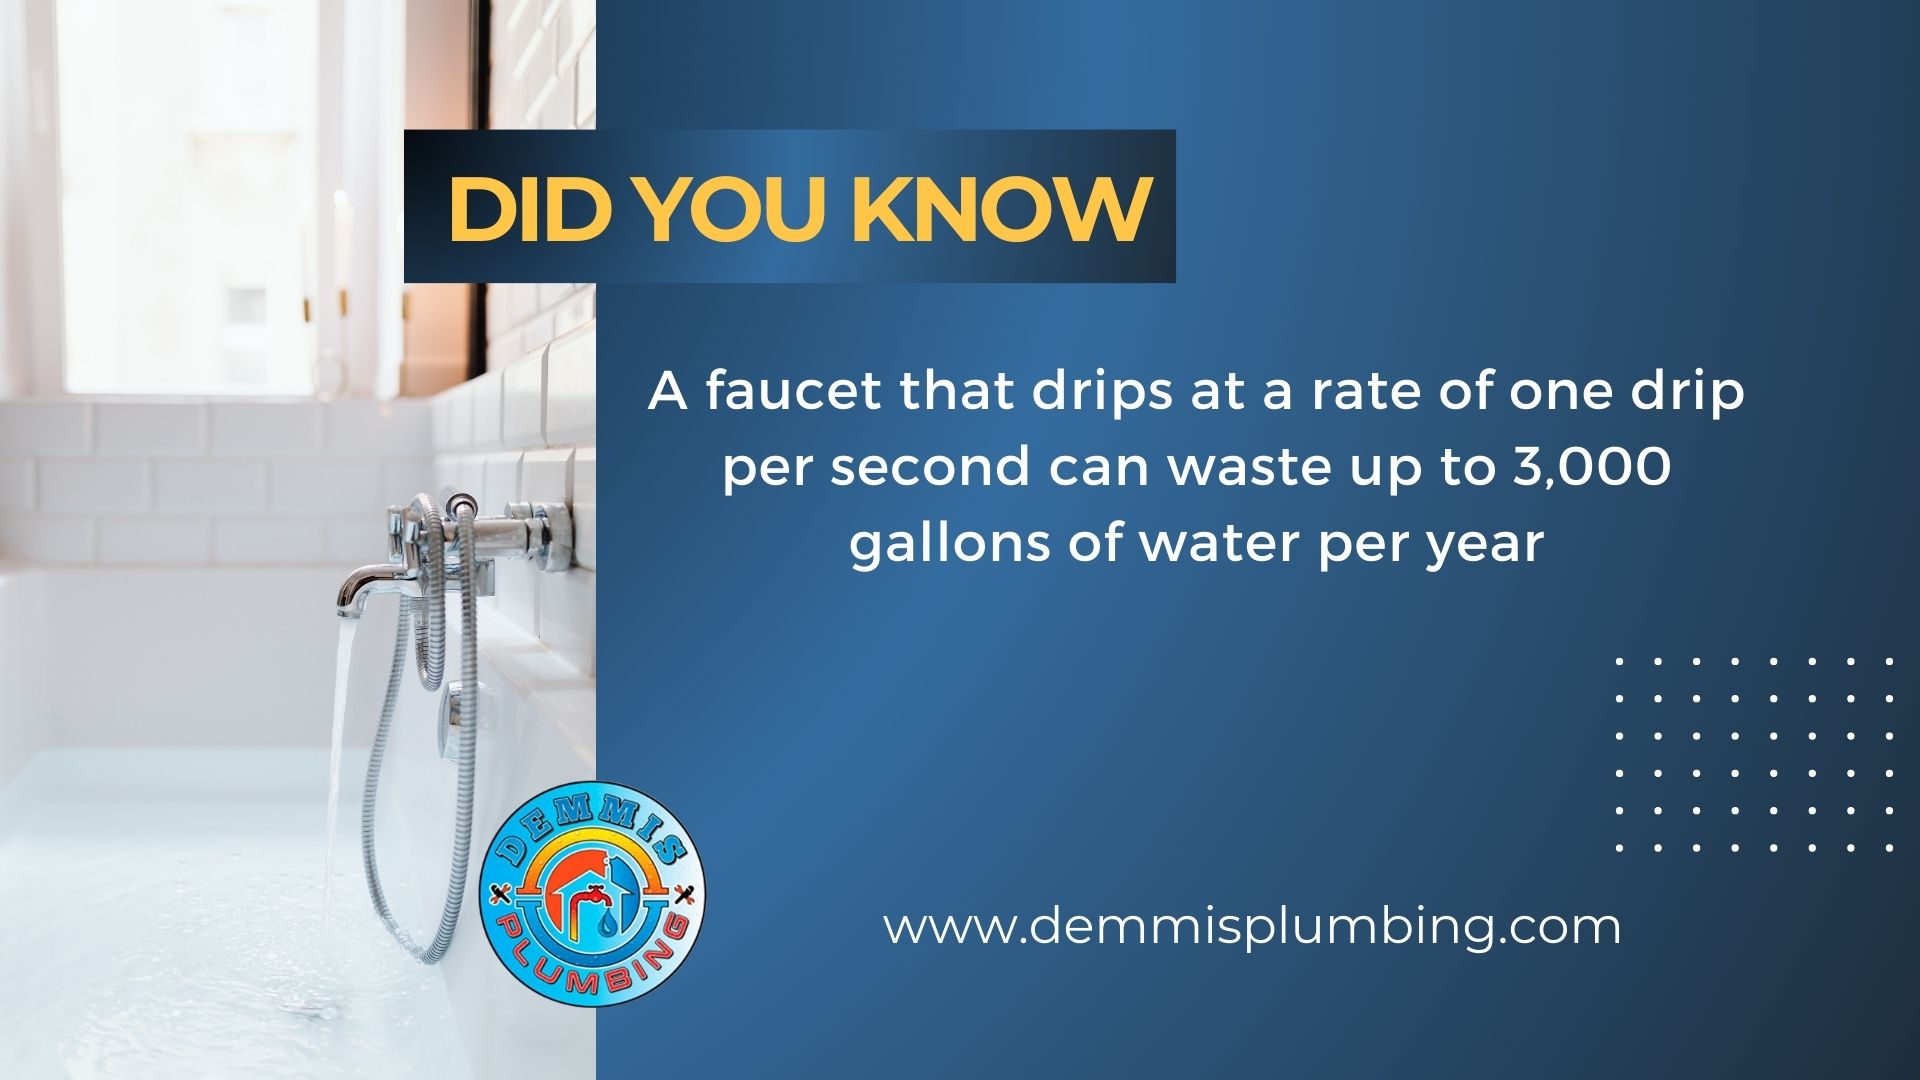 DID YOU KNOW A faucet that drips at a rate of one drip per second can waste up to 3,000 gallons of water per year